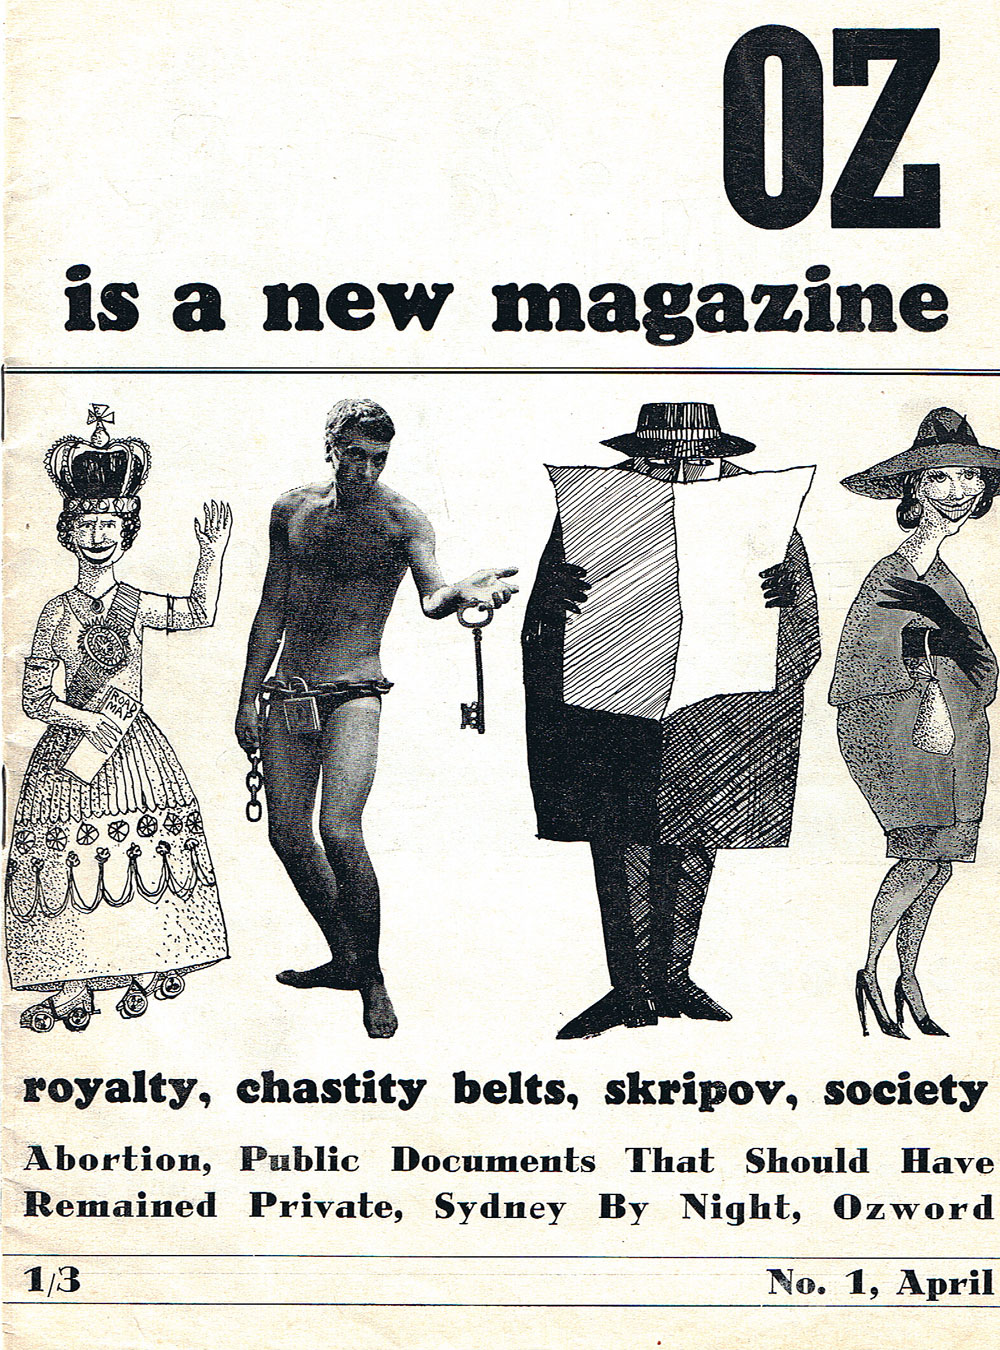 The front cover of Oz Sydney's first publication in 1963.